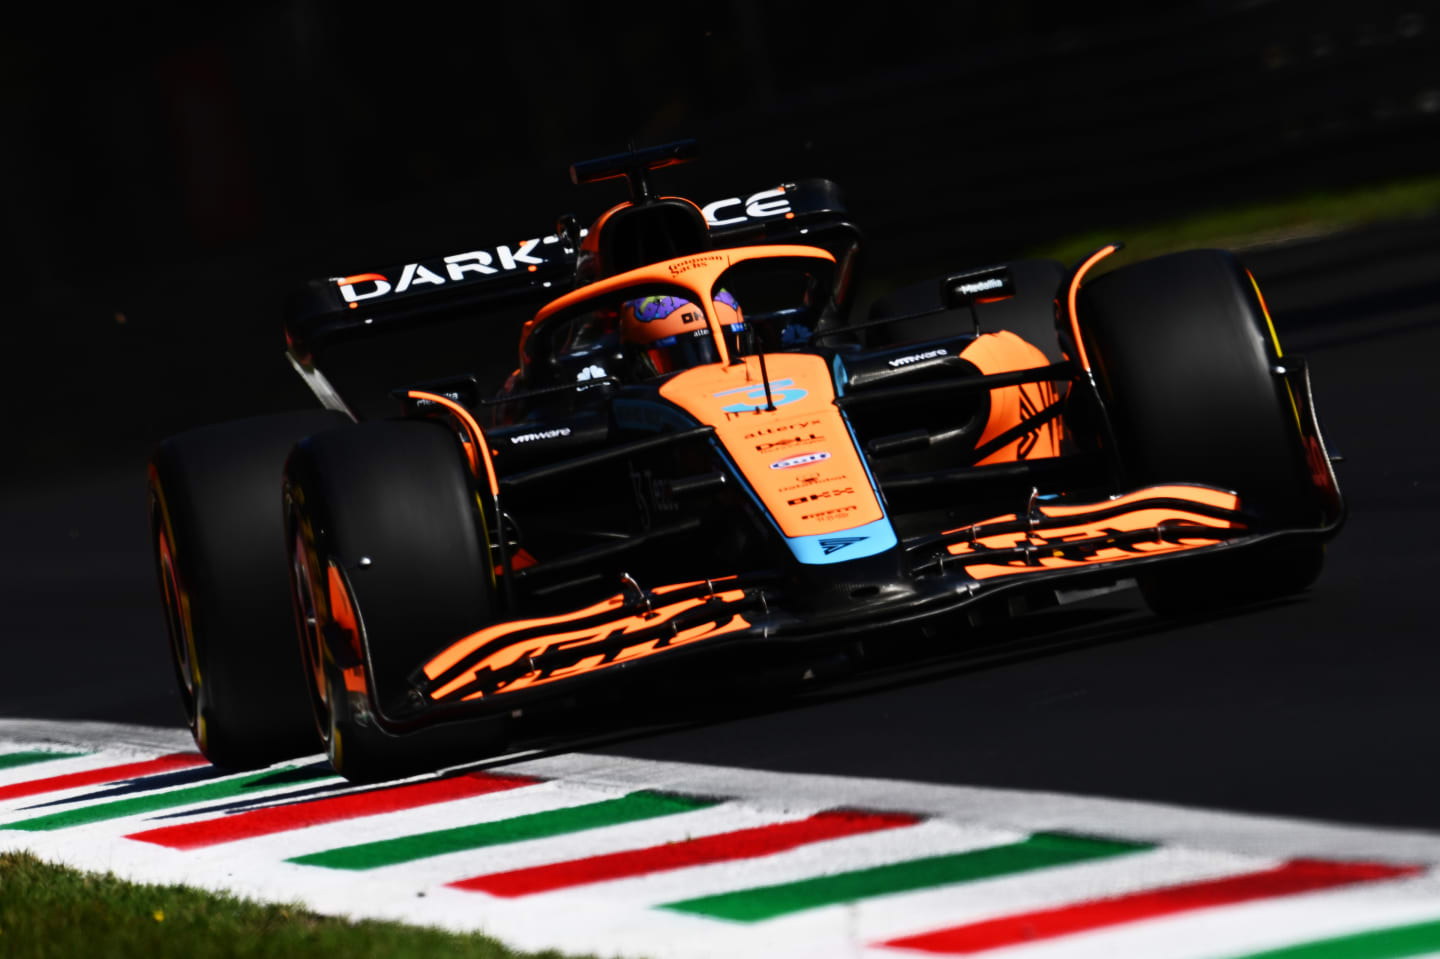 MONZA, ITALY - SEPTEMBER 10: Daniel Ricciardo of Australia driving the (3) McLaren MCL36 Mercedes on track during final practice ahead of the F1 Grand Prix of Italy at Autodromo Nazionale Monza on September 10, 2022 in Monza, Italy. (Photo by Clive Mason/Getty Images)